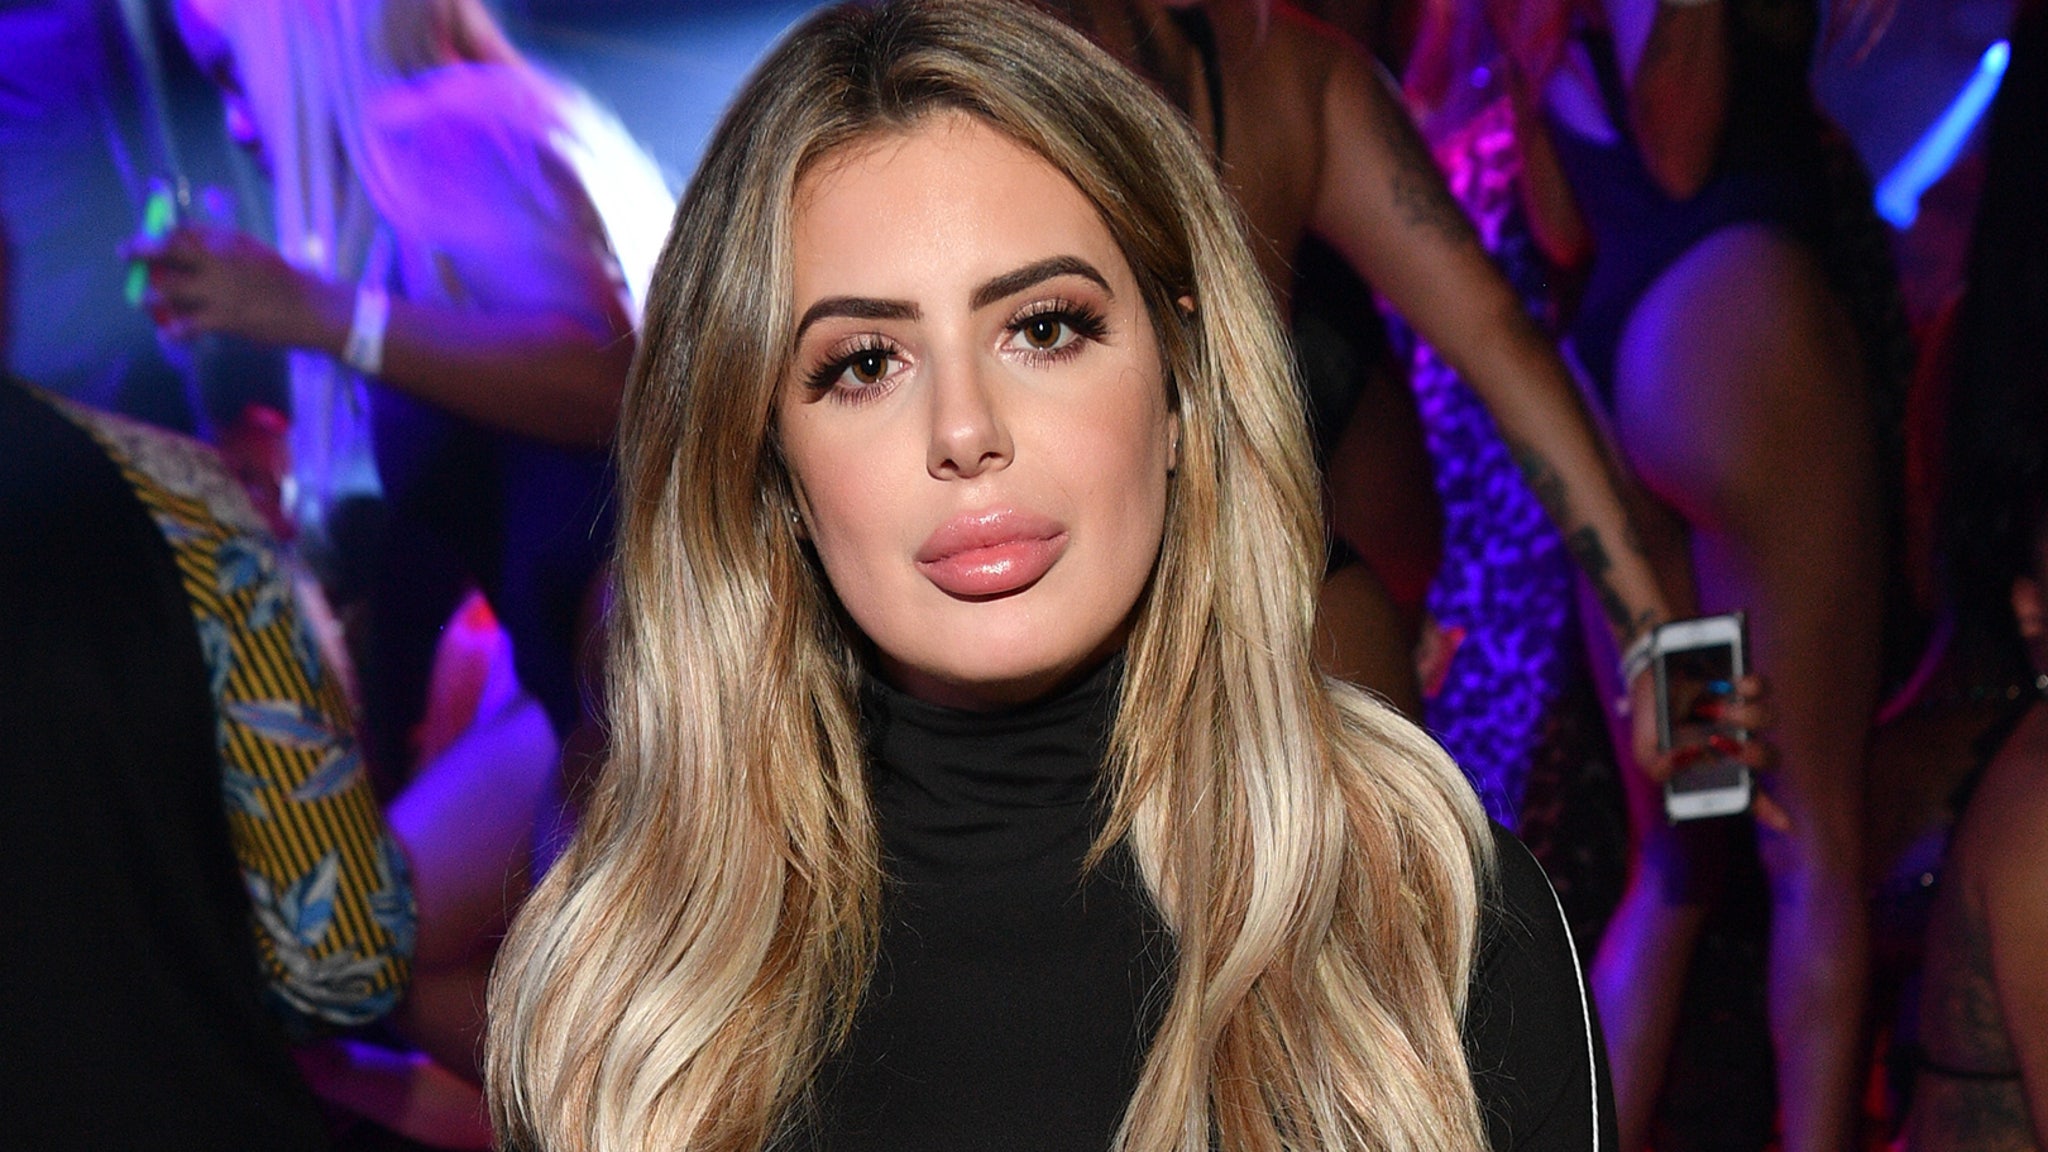 Brielle Biermann Shares Another Photo After Dissolving Lip Fillers